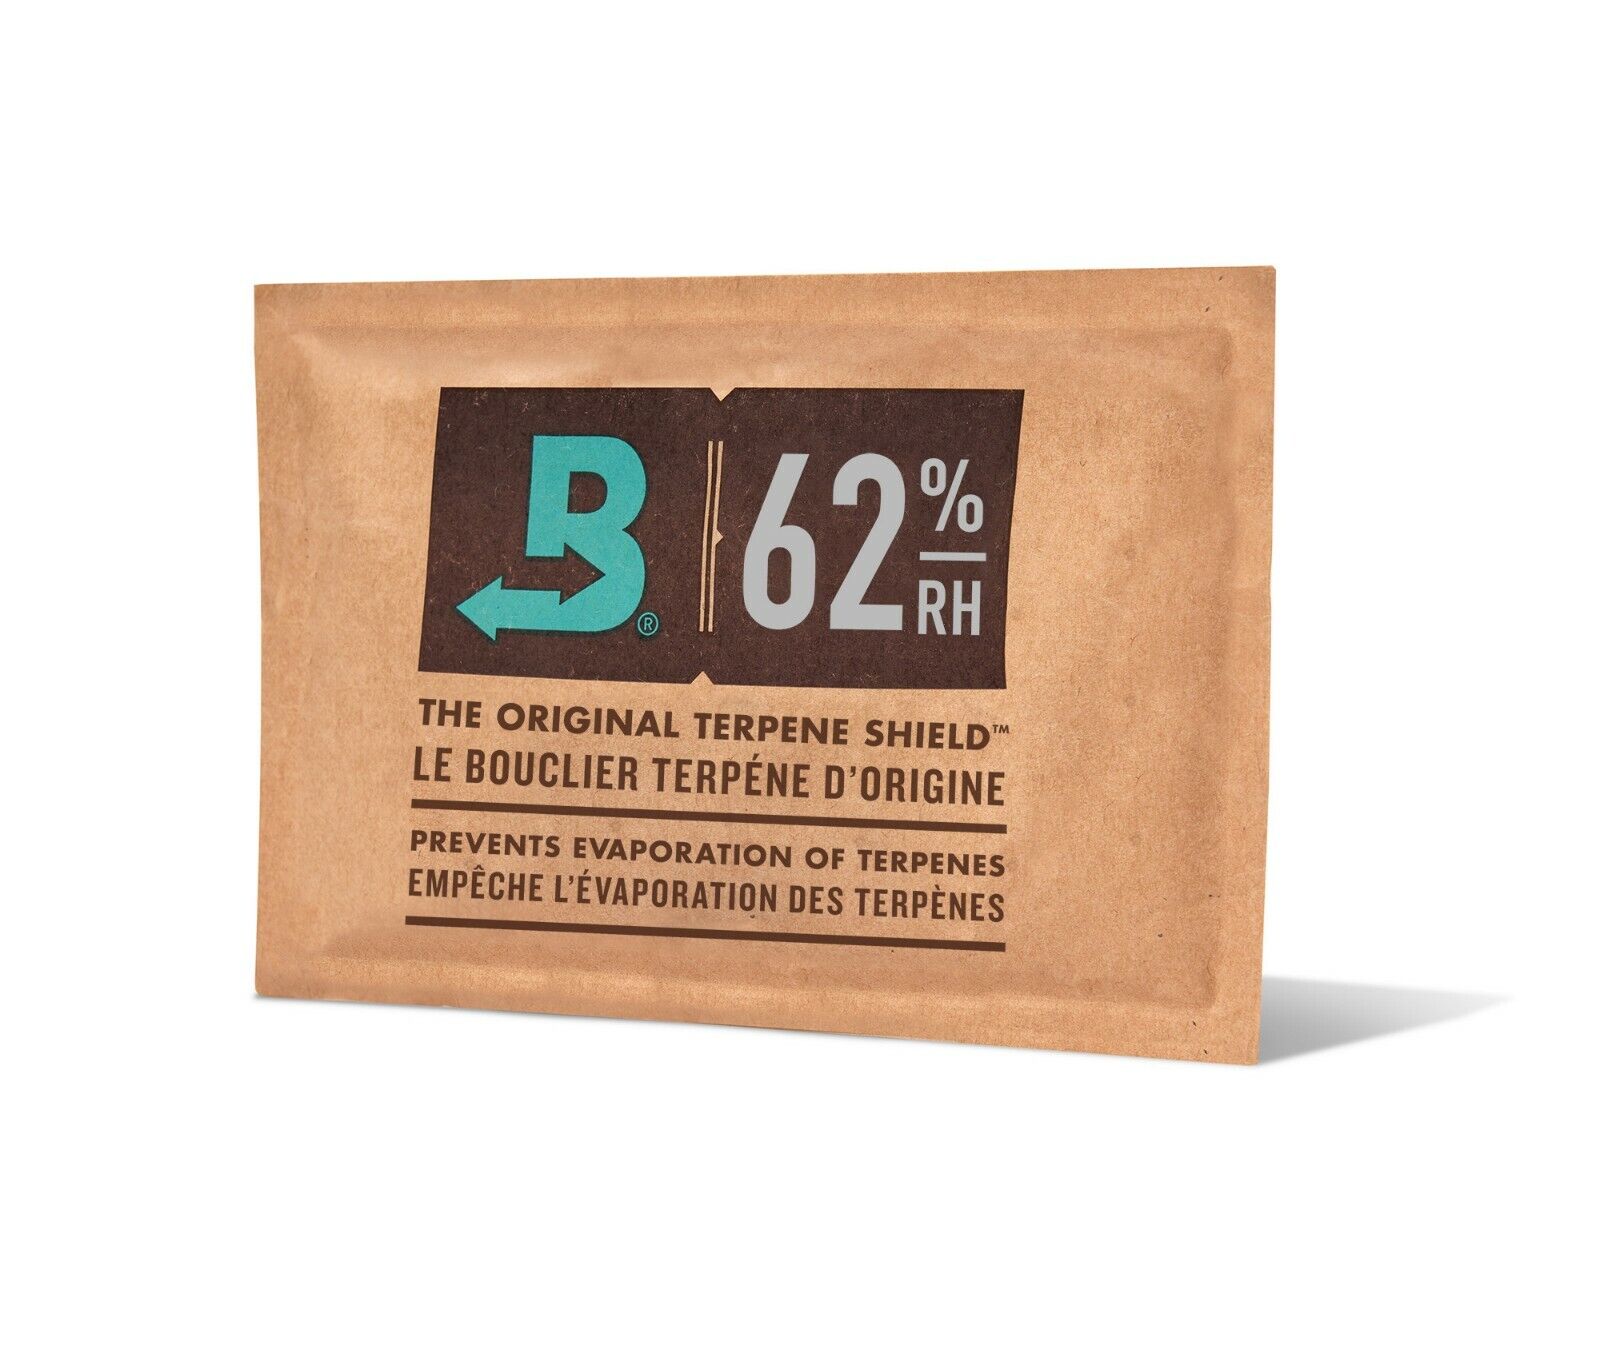 Boveda 62% RH 2-Way Humidity Control - Size 67 Protects Up to 1 Lb